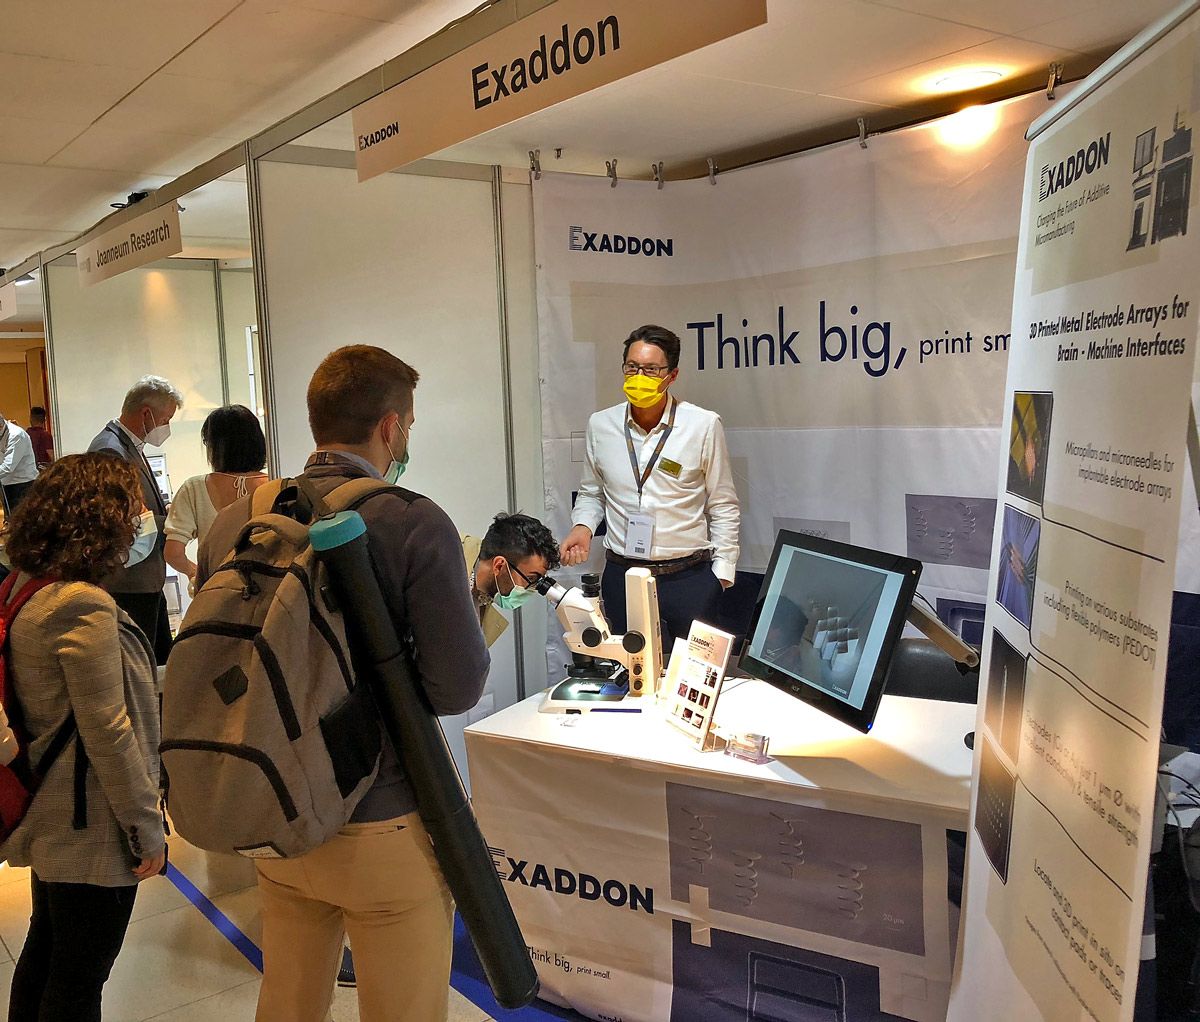 CEO Edgar Hepp speaking to visitors at the Exaddon booth at Micro Nano Engineering Conference 2021